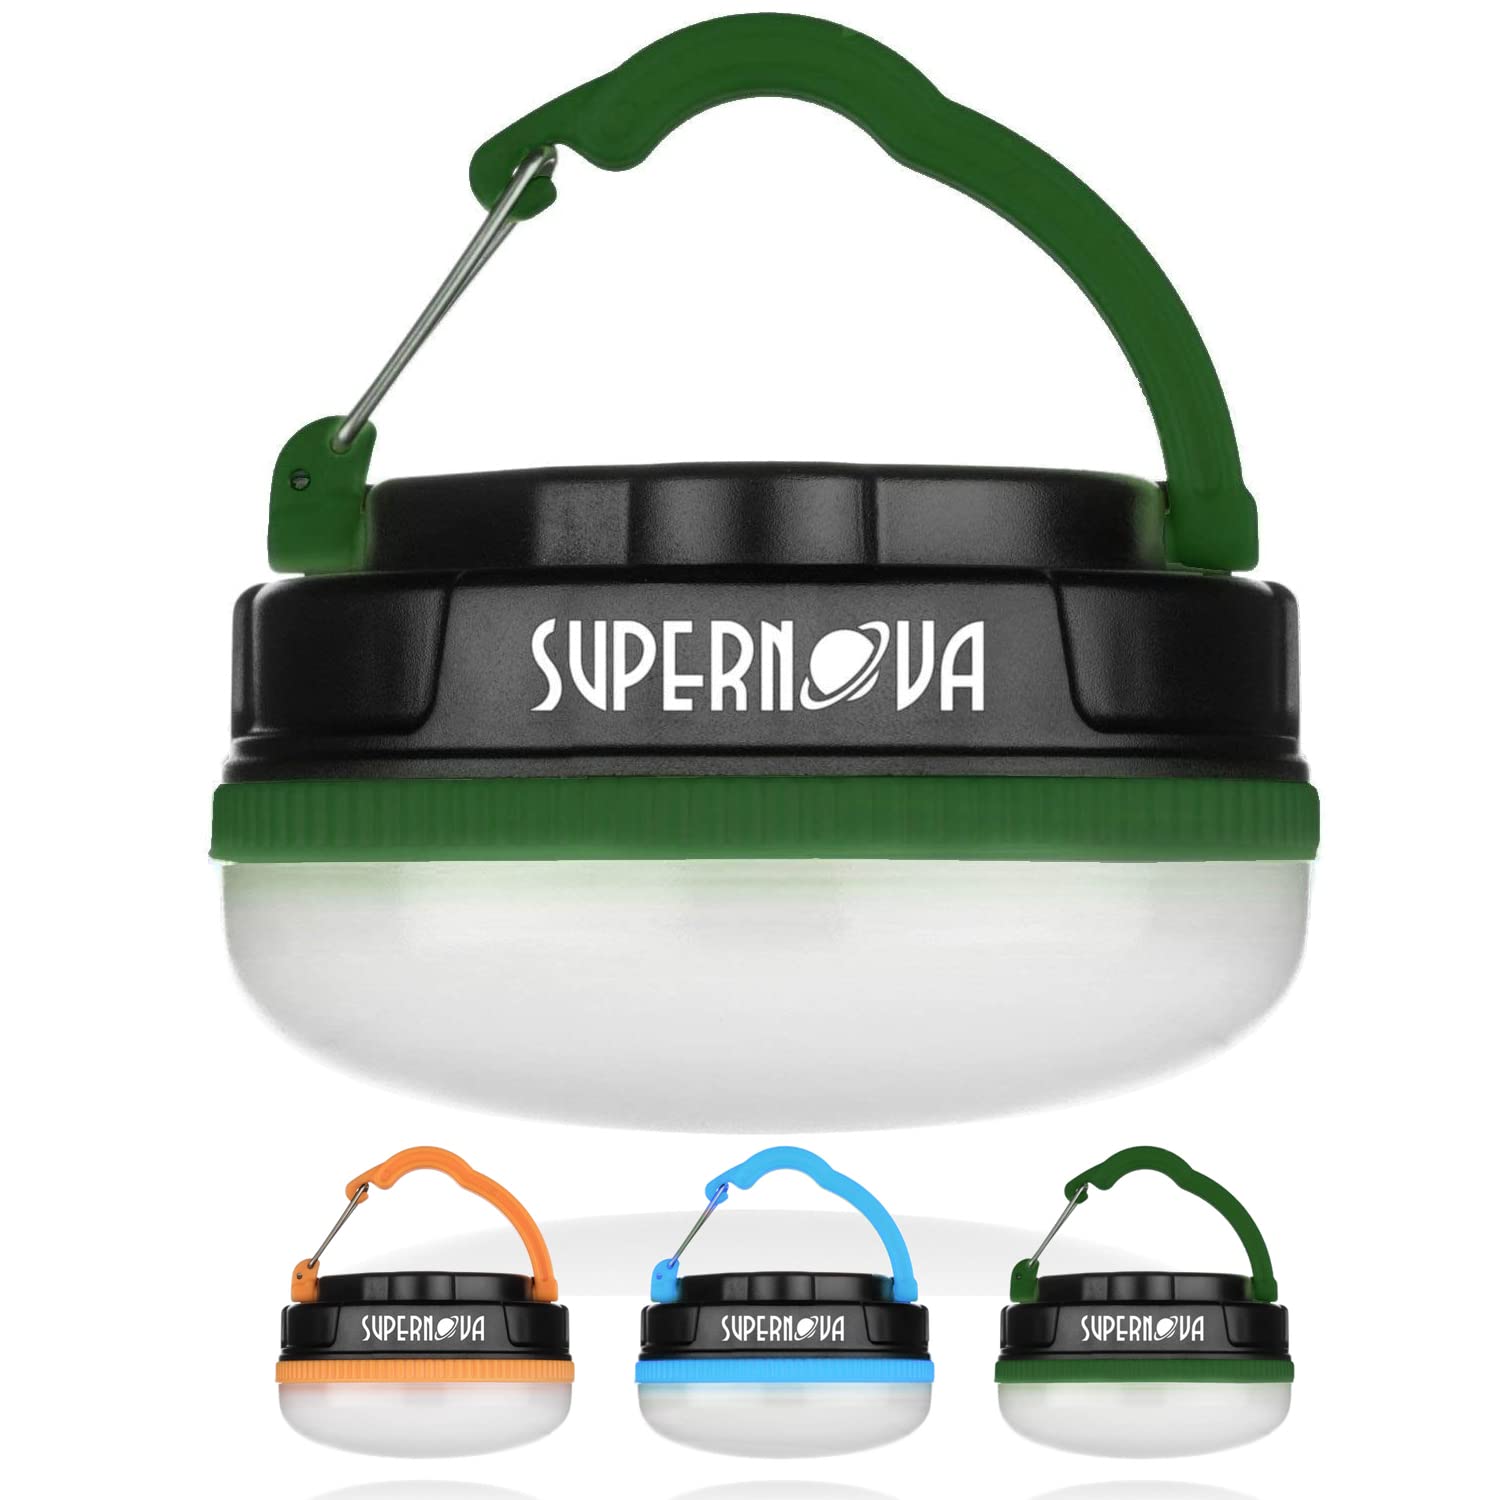 Supernova Halo 150 Camping Tent Light Hanging Lantern w/ Magnetic Base (3 Colors) $10.80 + Free Shipping w/ Prime or on $25+